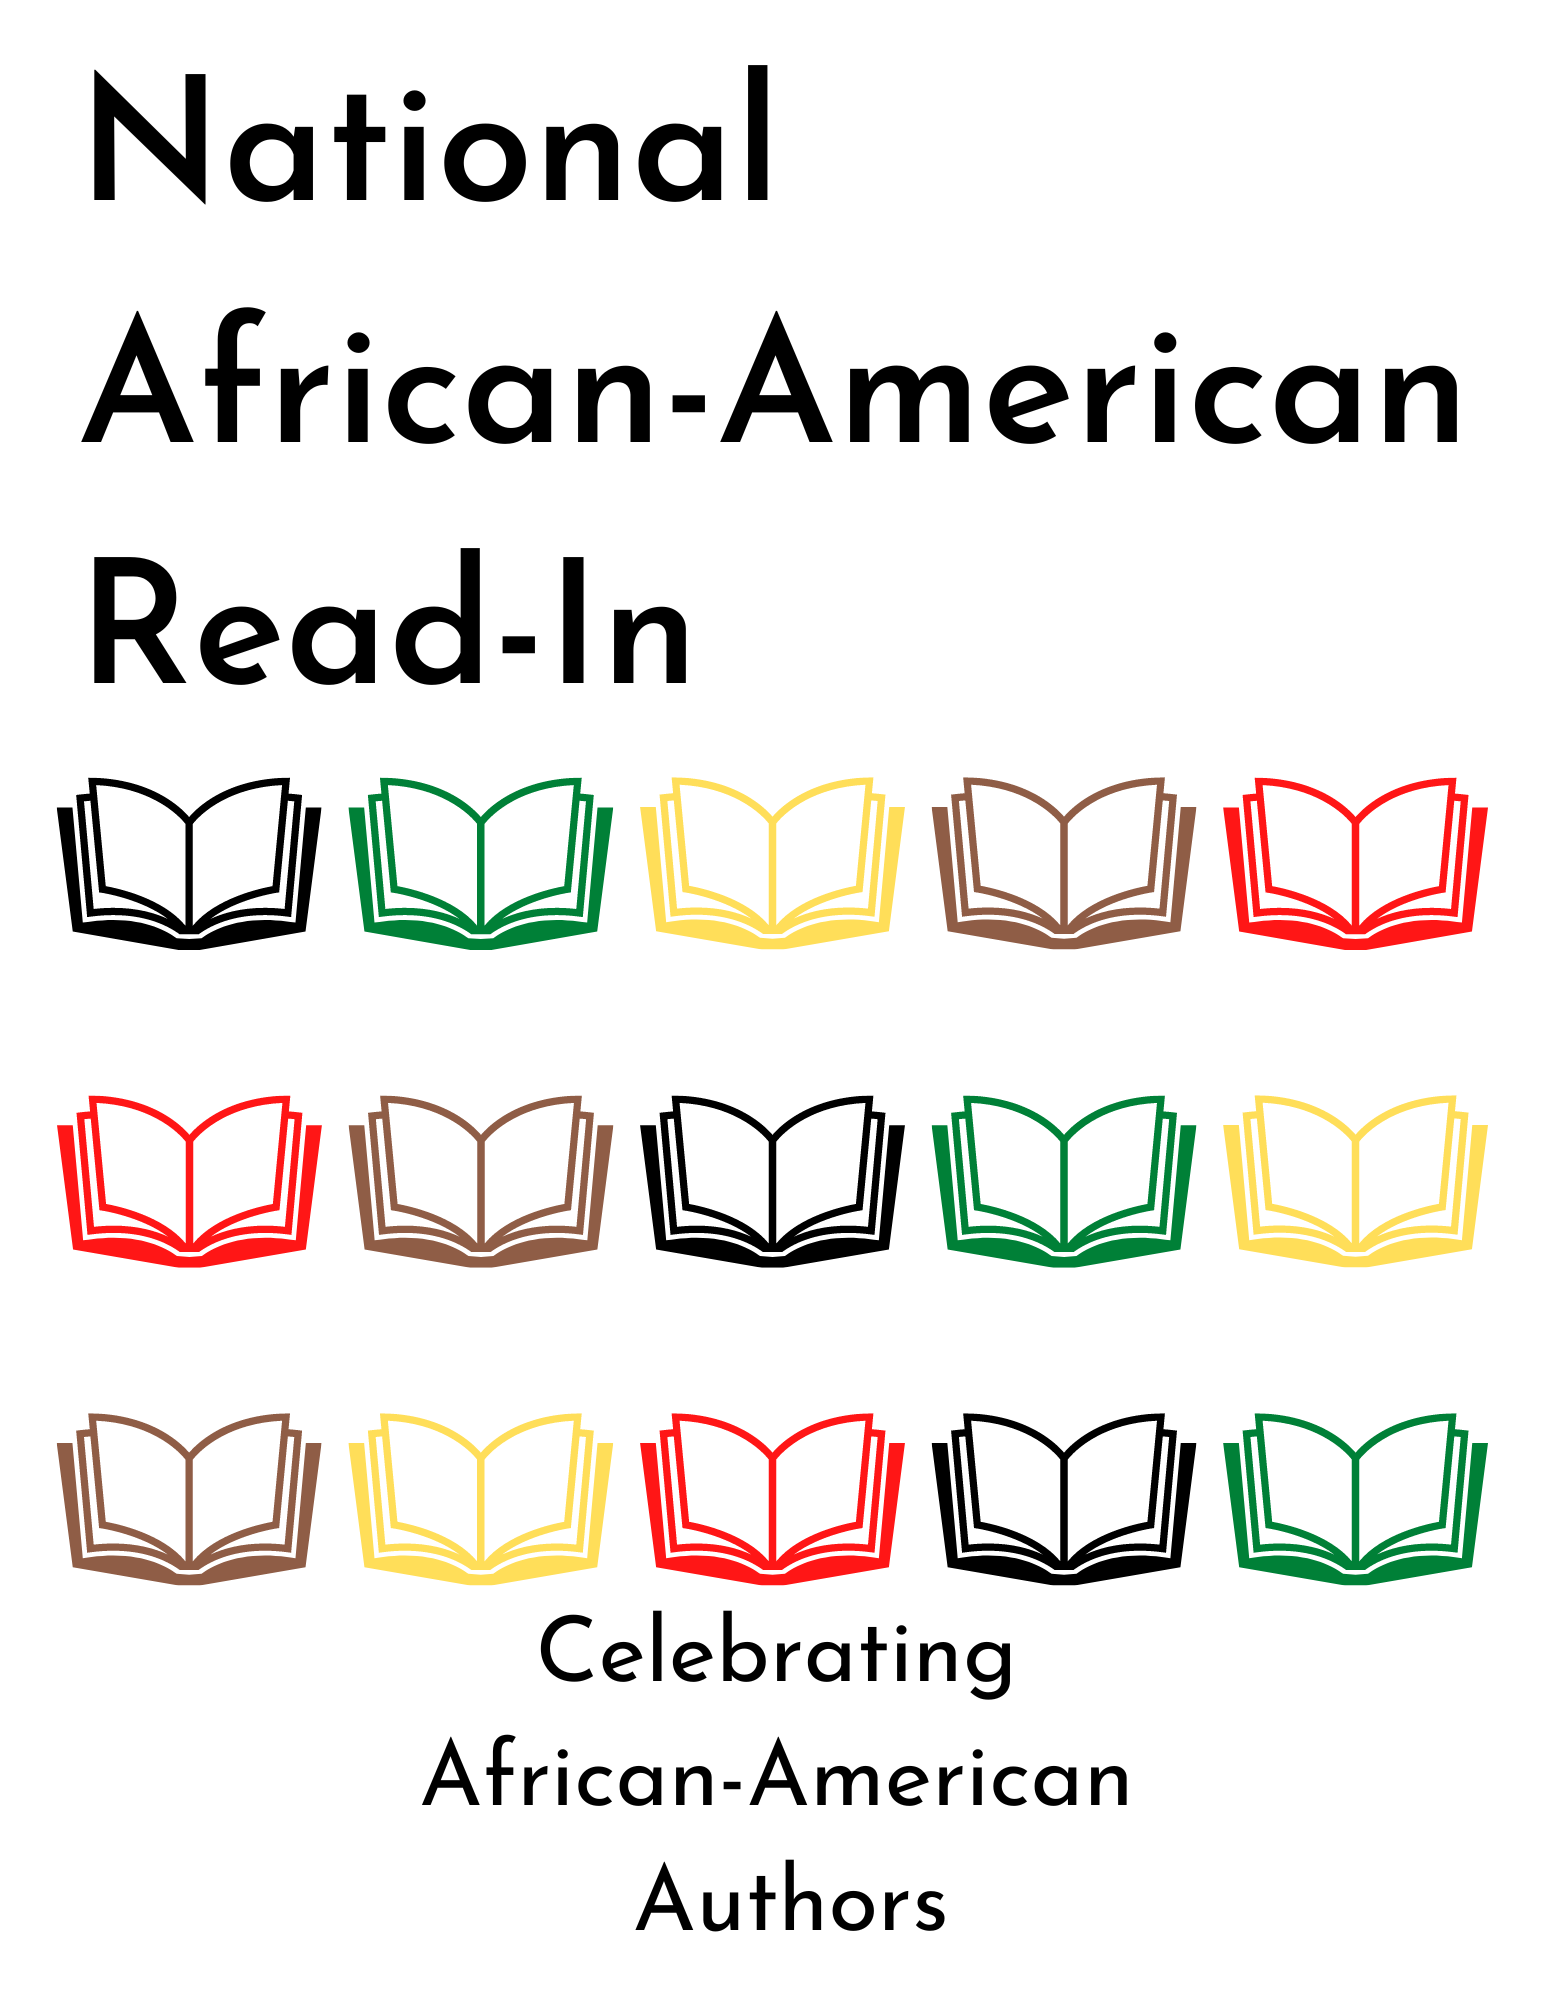 books and "National African-American Read-In"